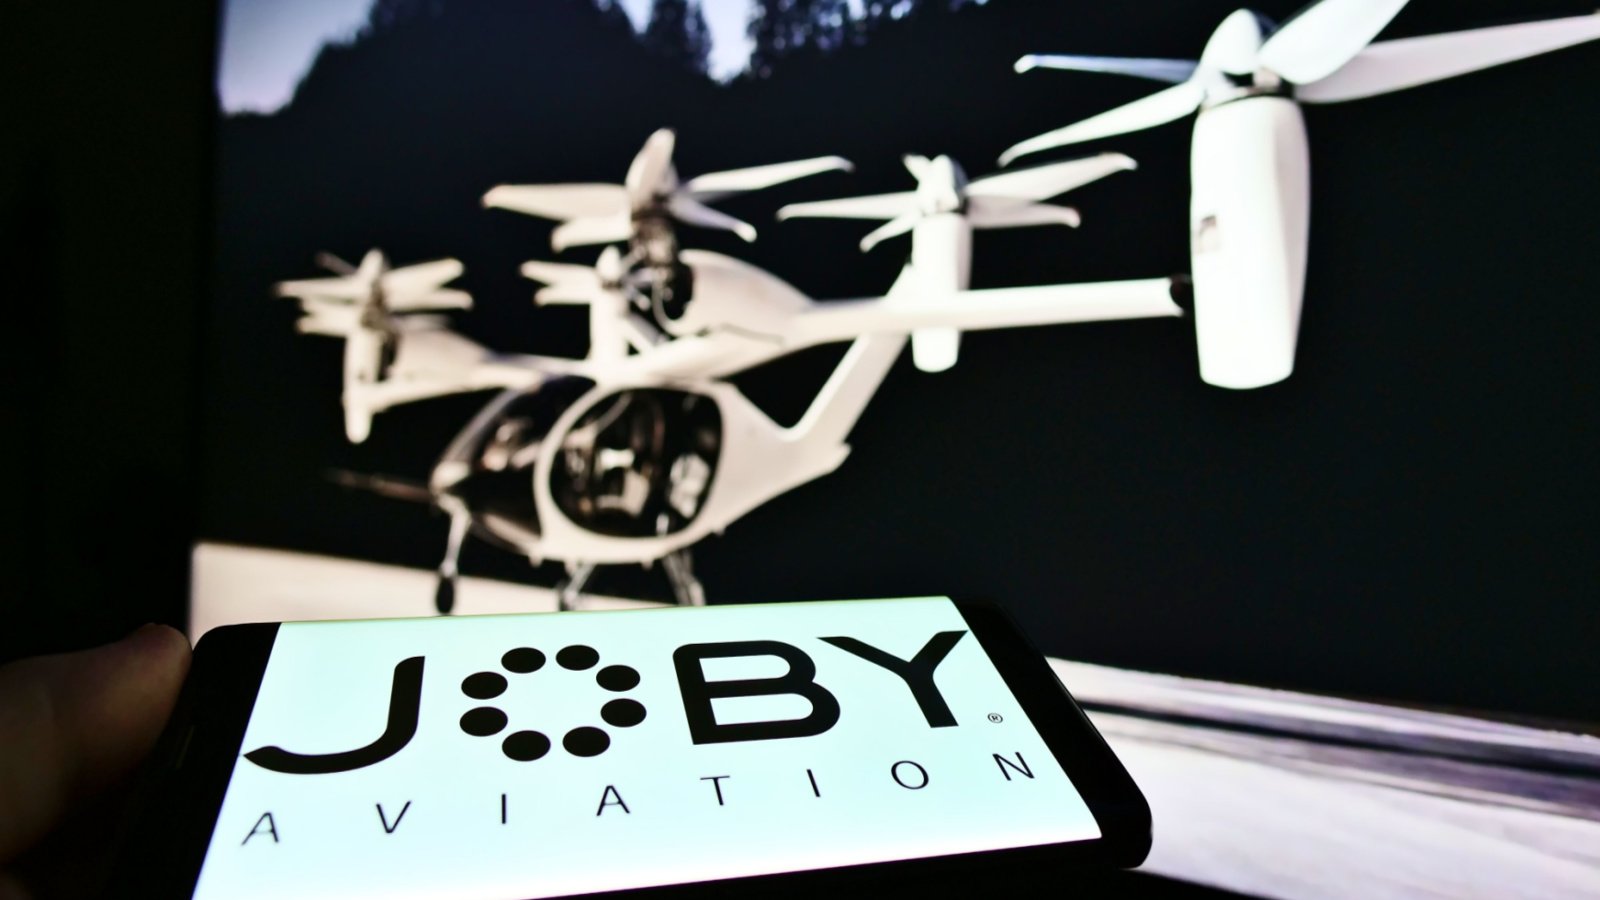 A Joby Aviation (JOBY Stock) air taxi on display.